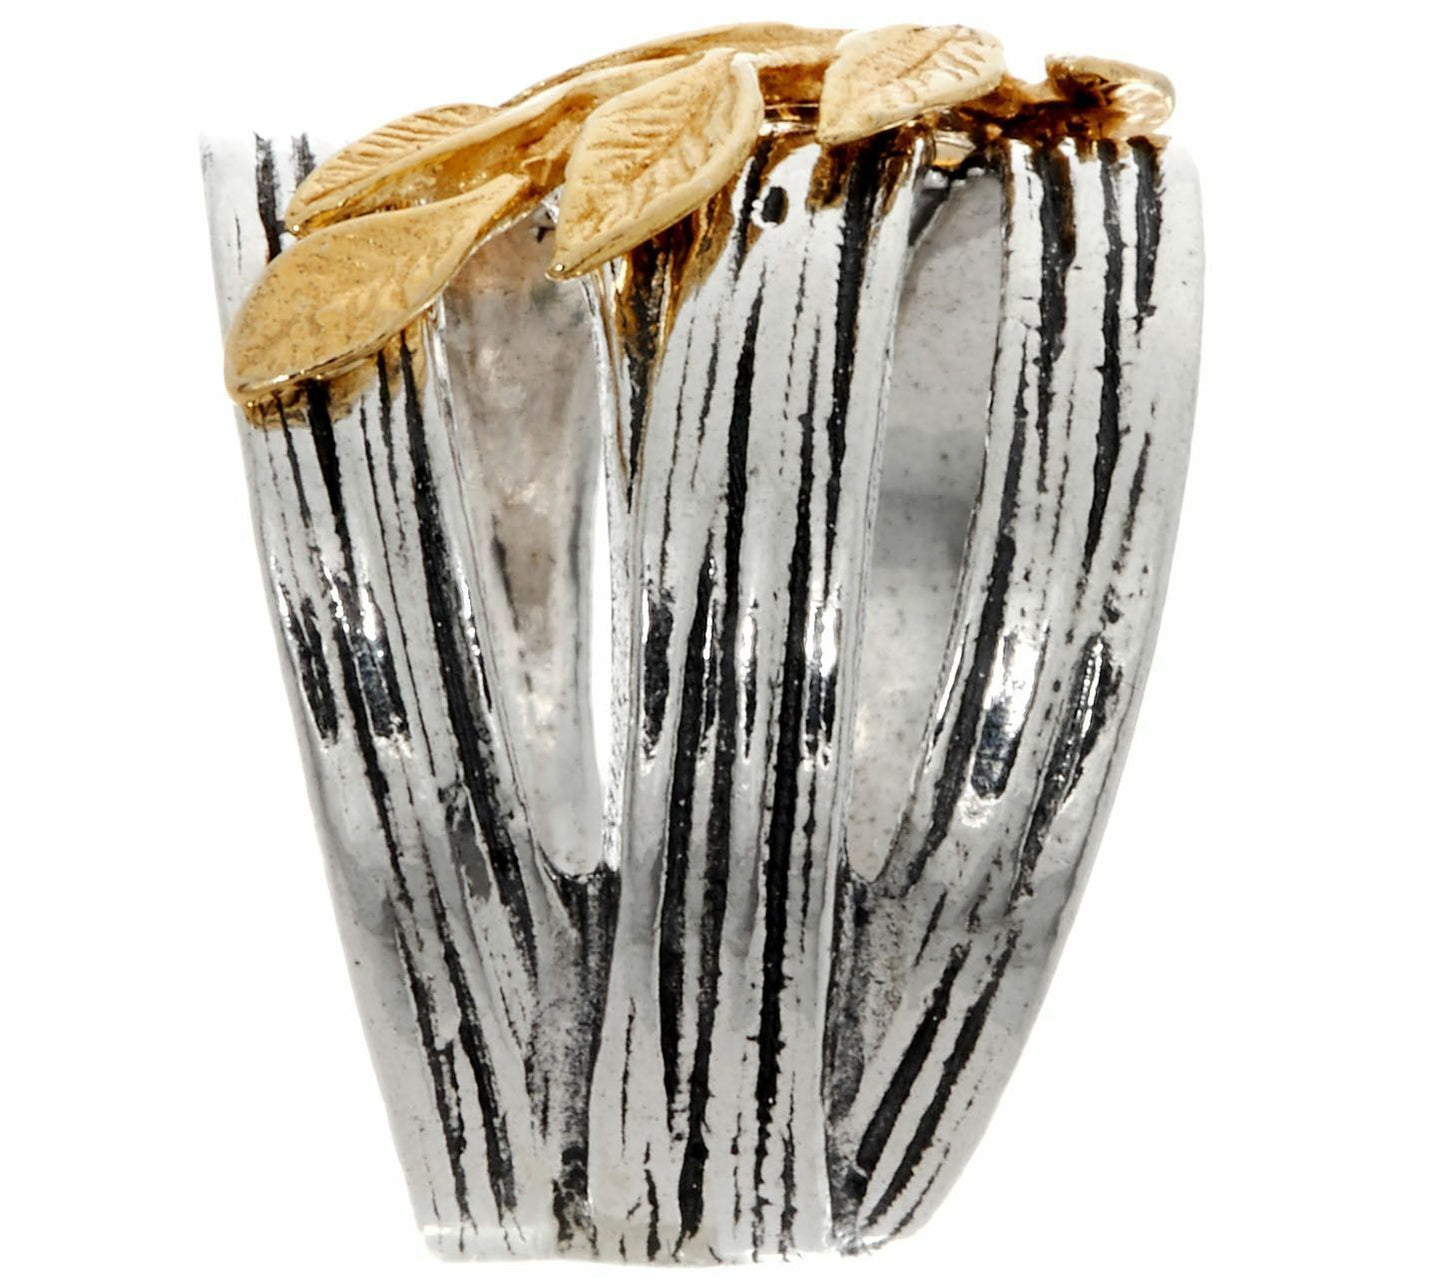 Or Paz Sterling Silver, 14K Silver Plated Two-Tone Leaf Ring, Size 5